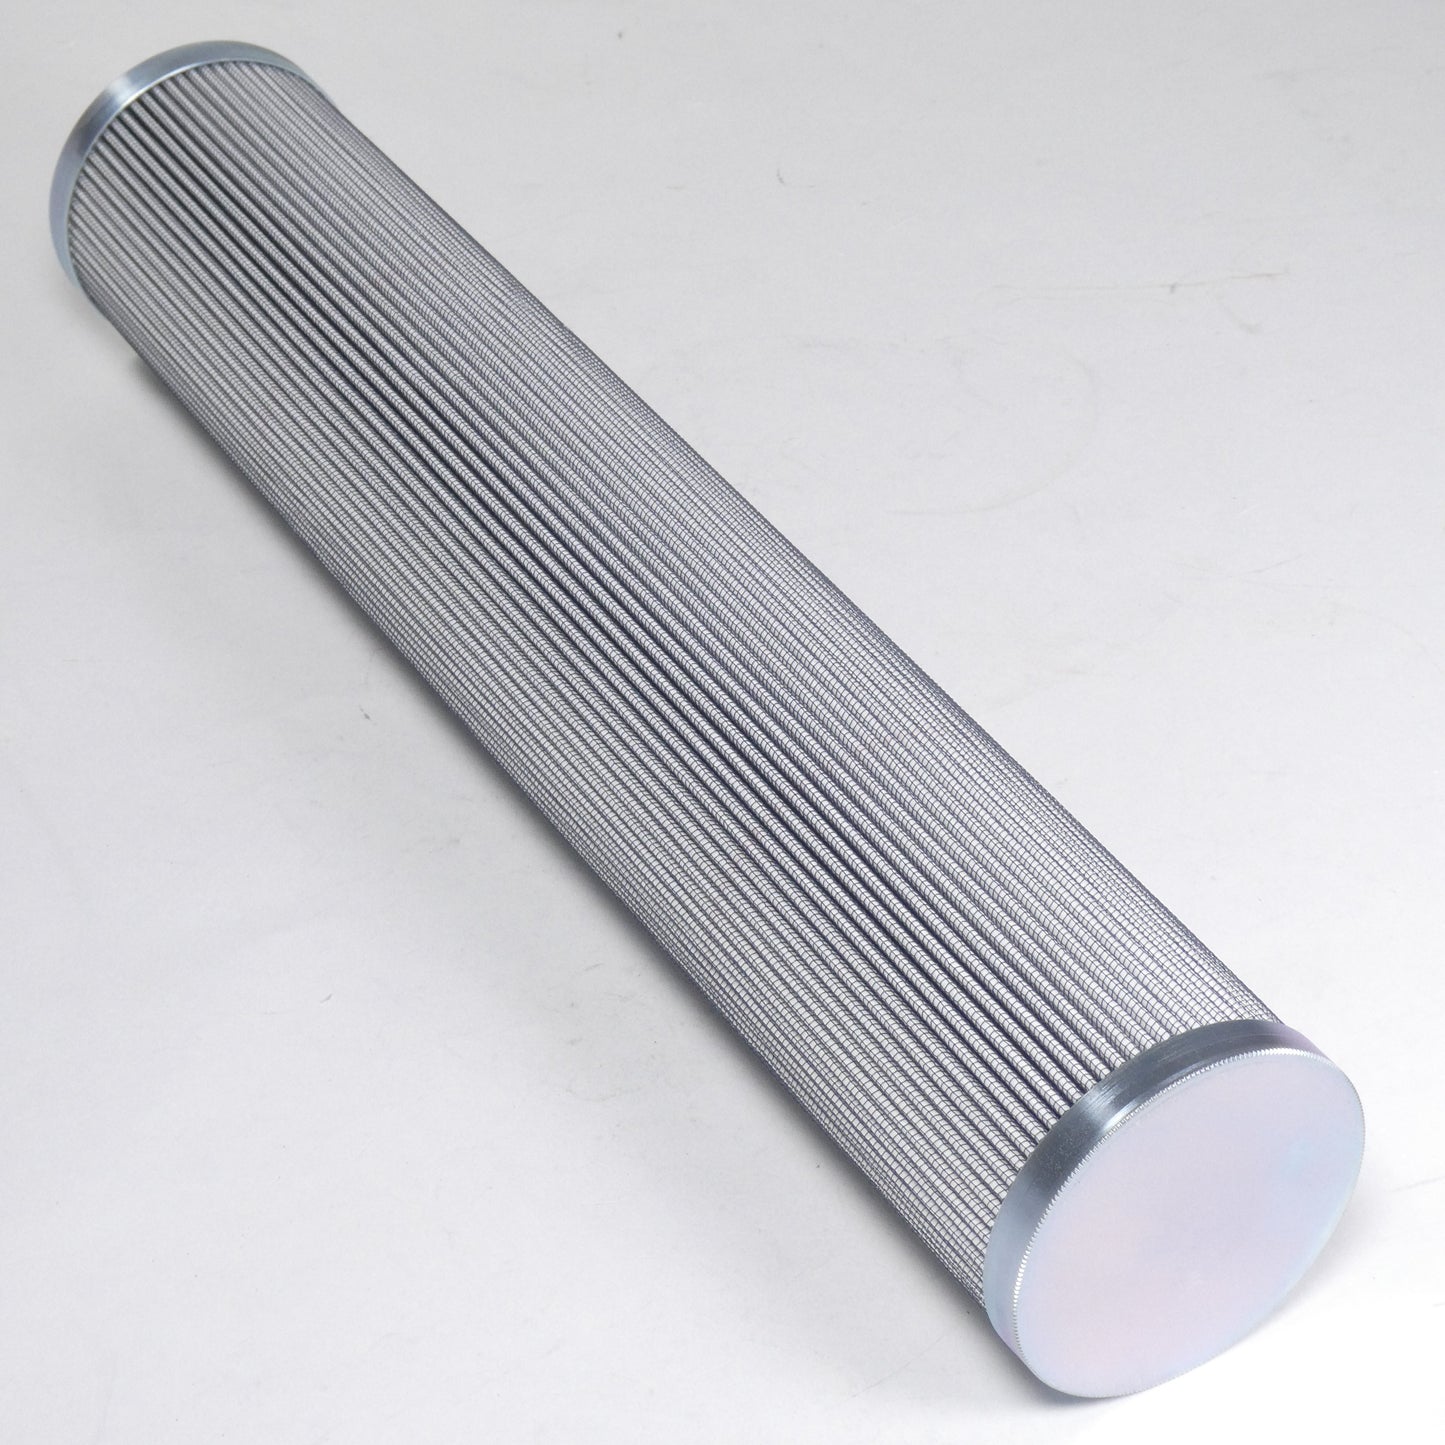 Hydrafil Replacement Filter Element for Internormen 05.9601.12.200.210.E.V.16